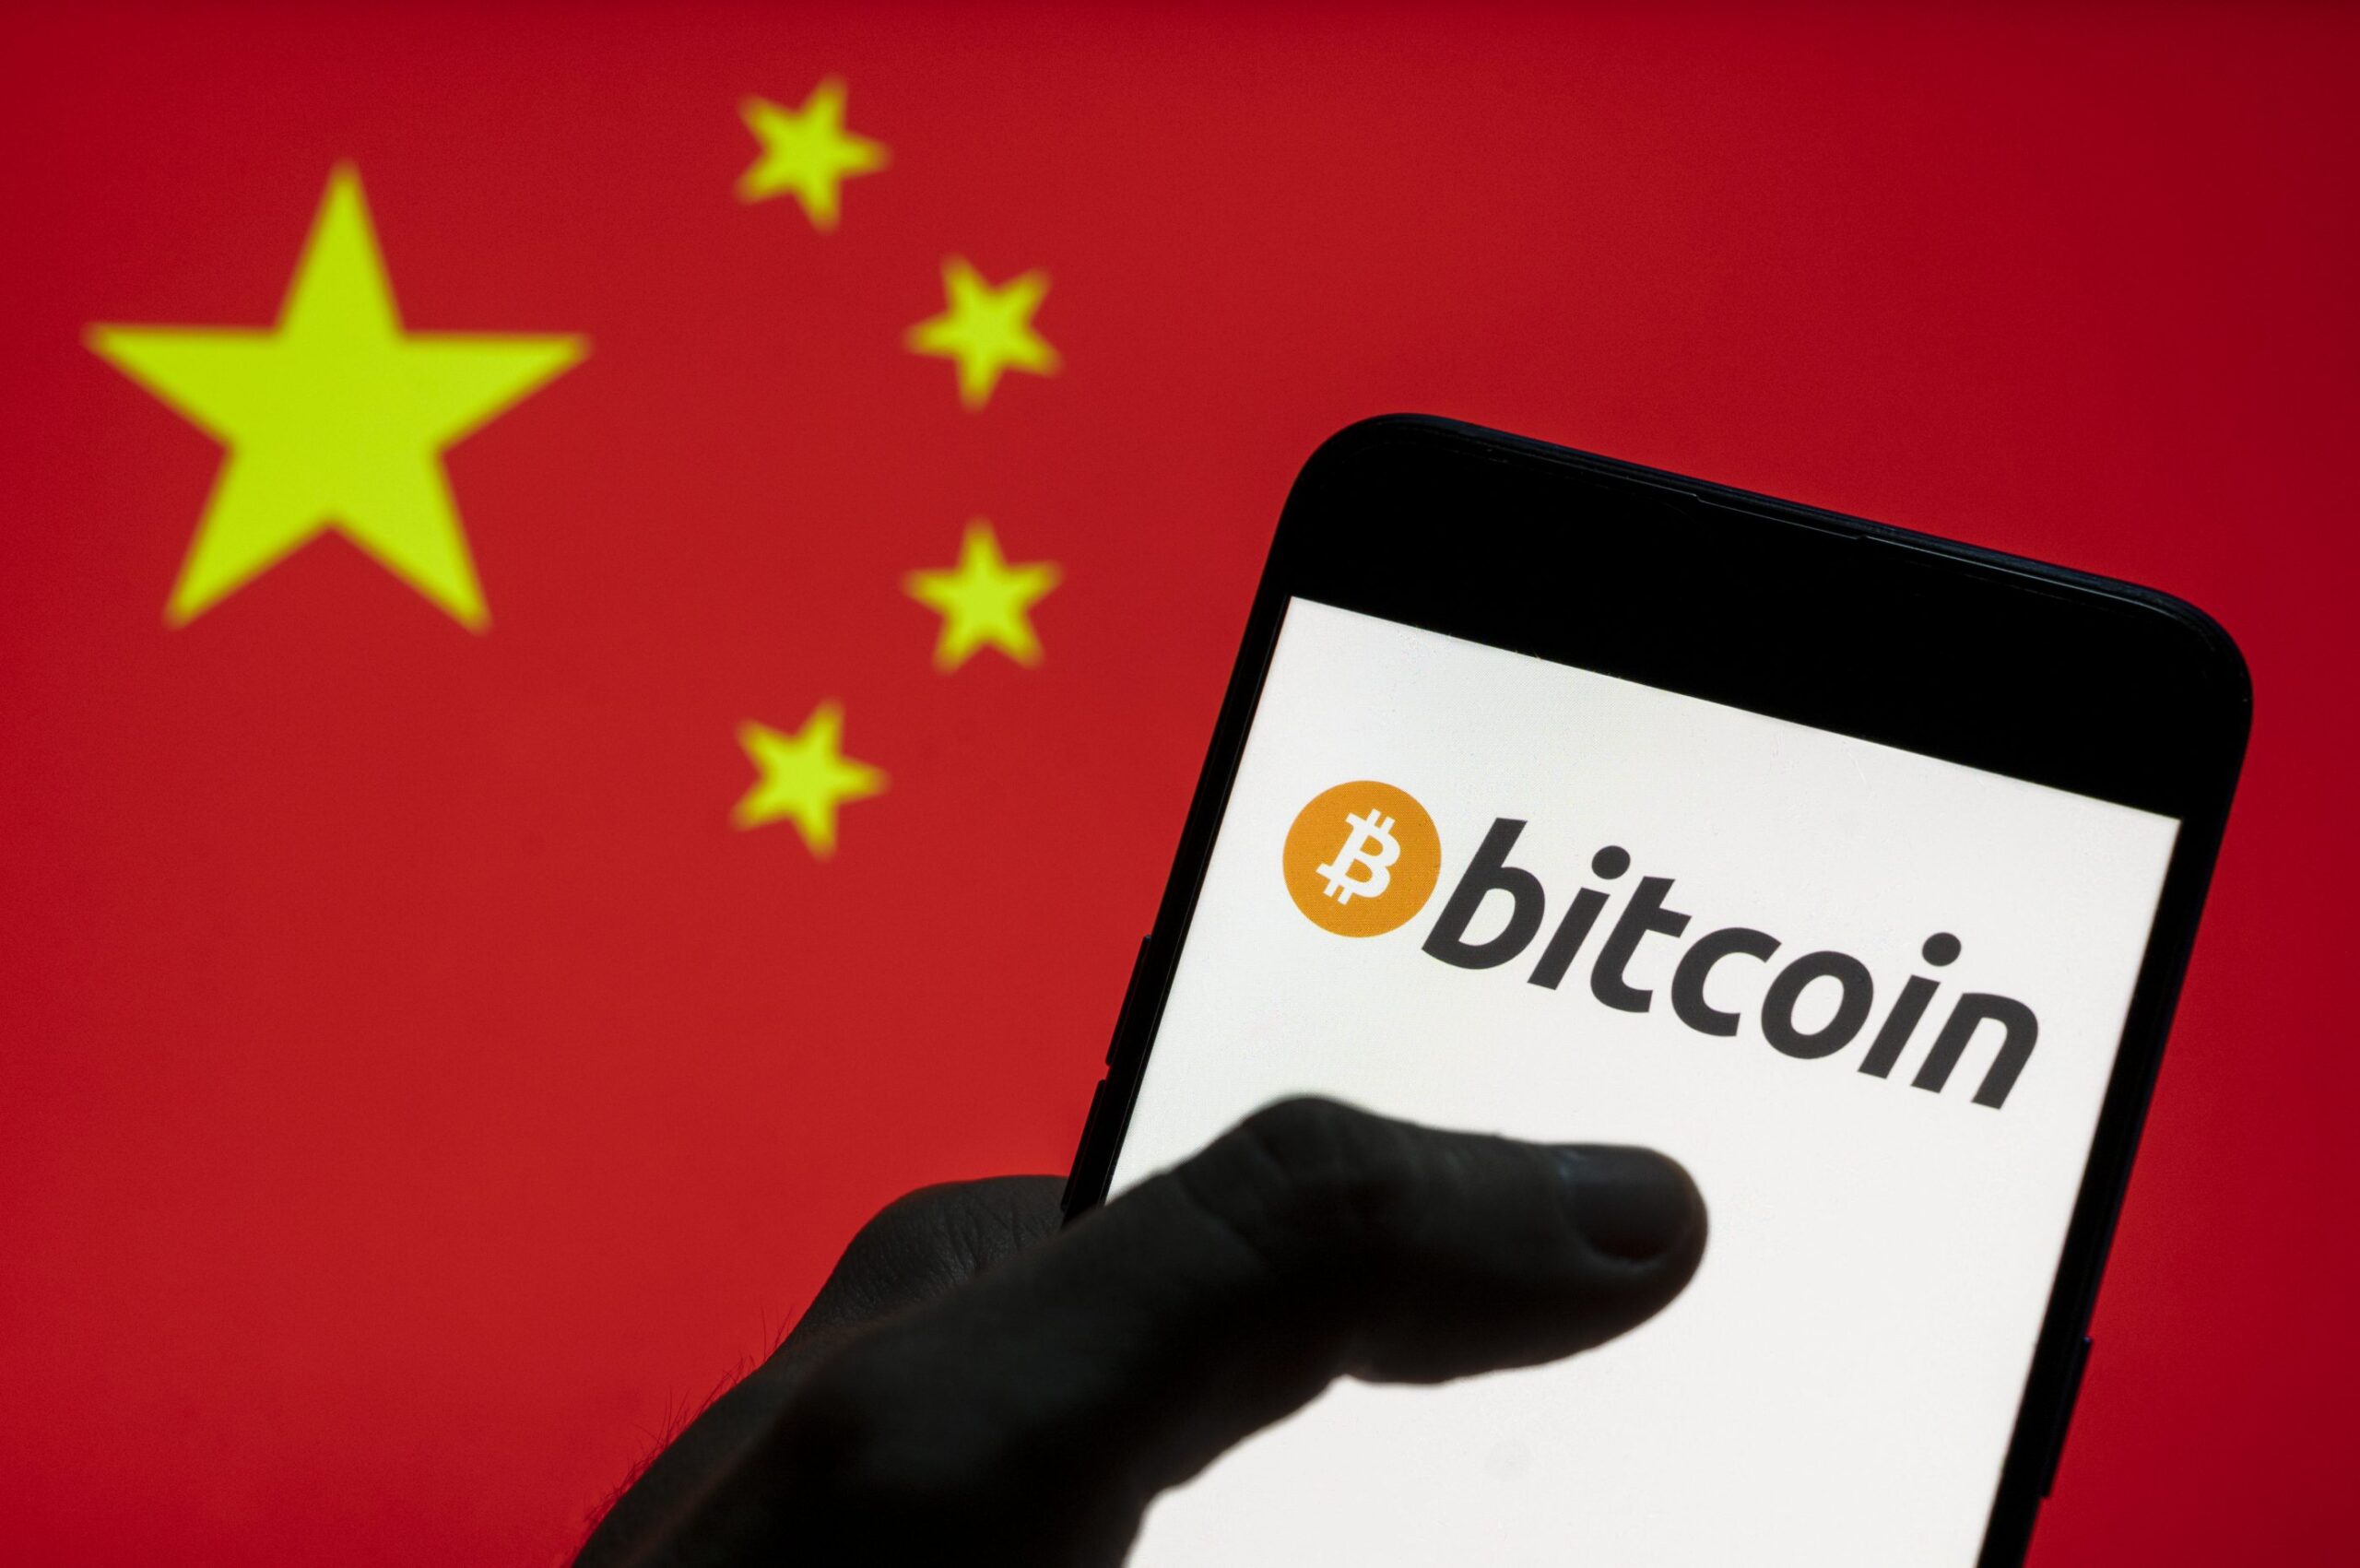 Chinese citizens buying Bitcoin in Hong Kong against the country's law 8